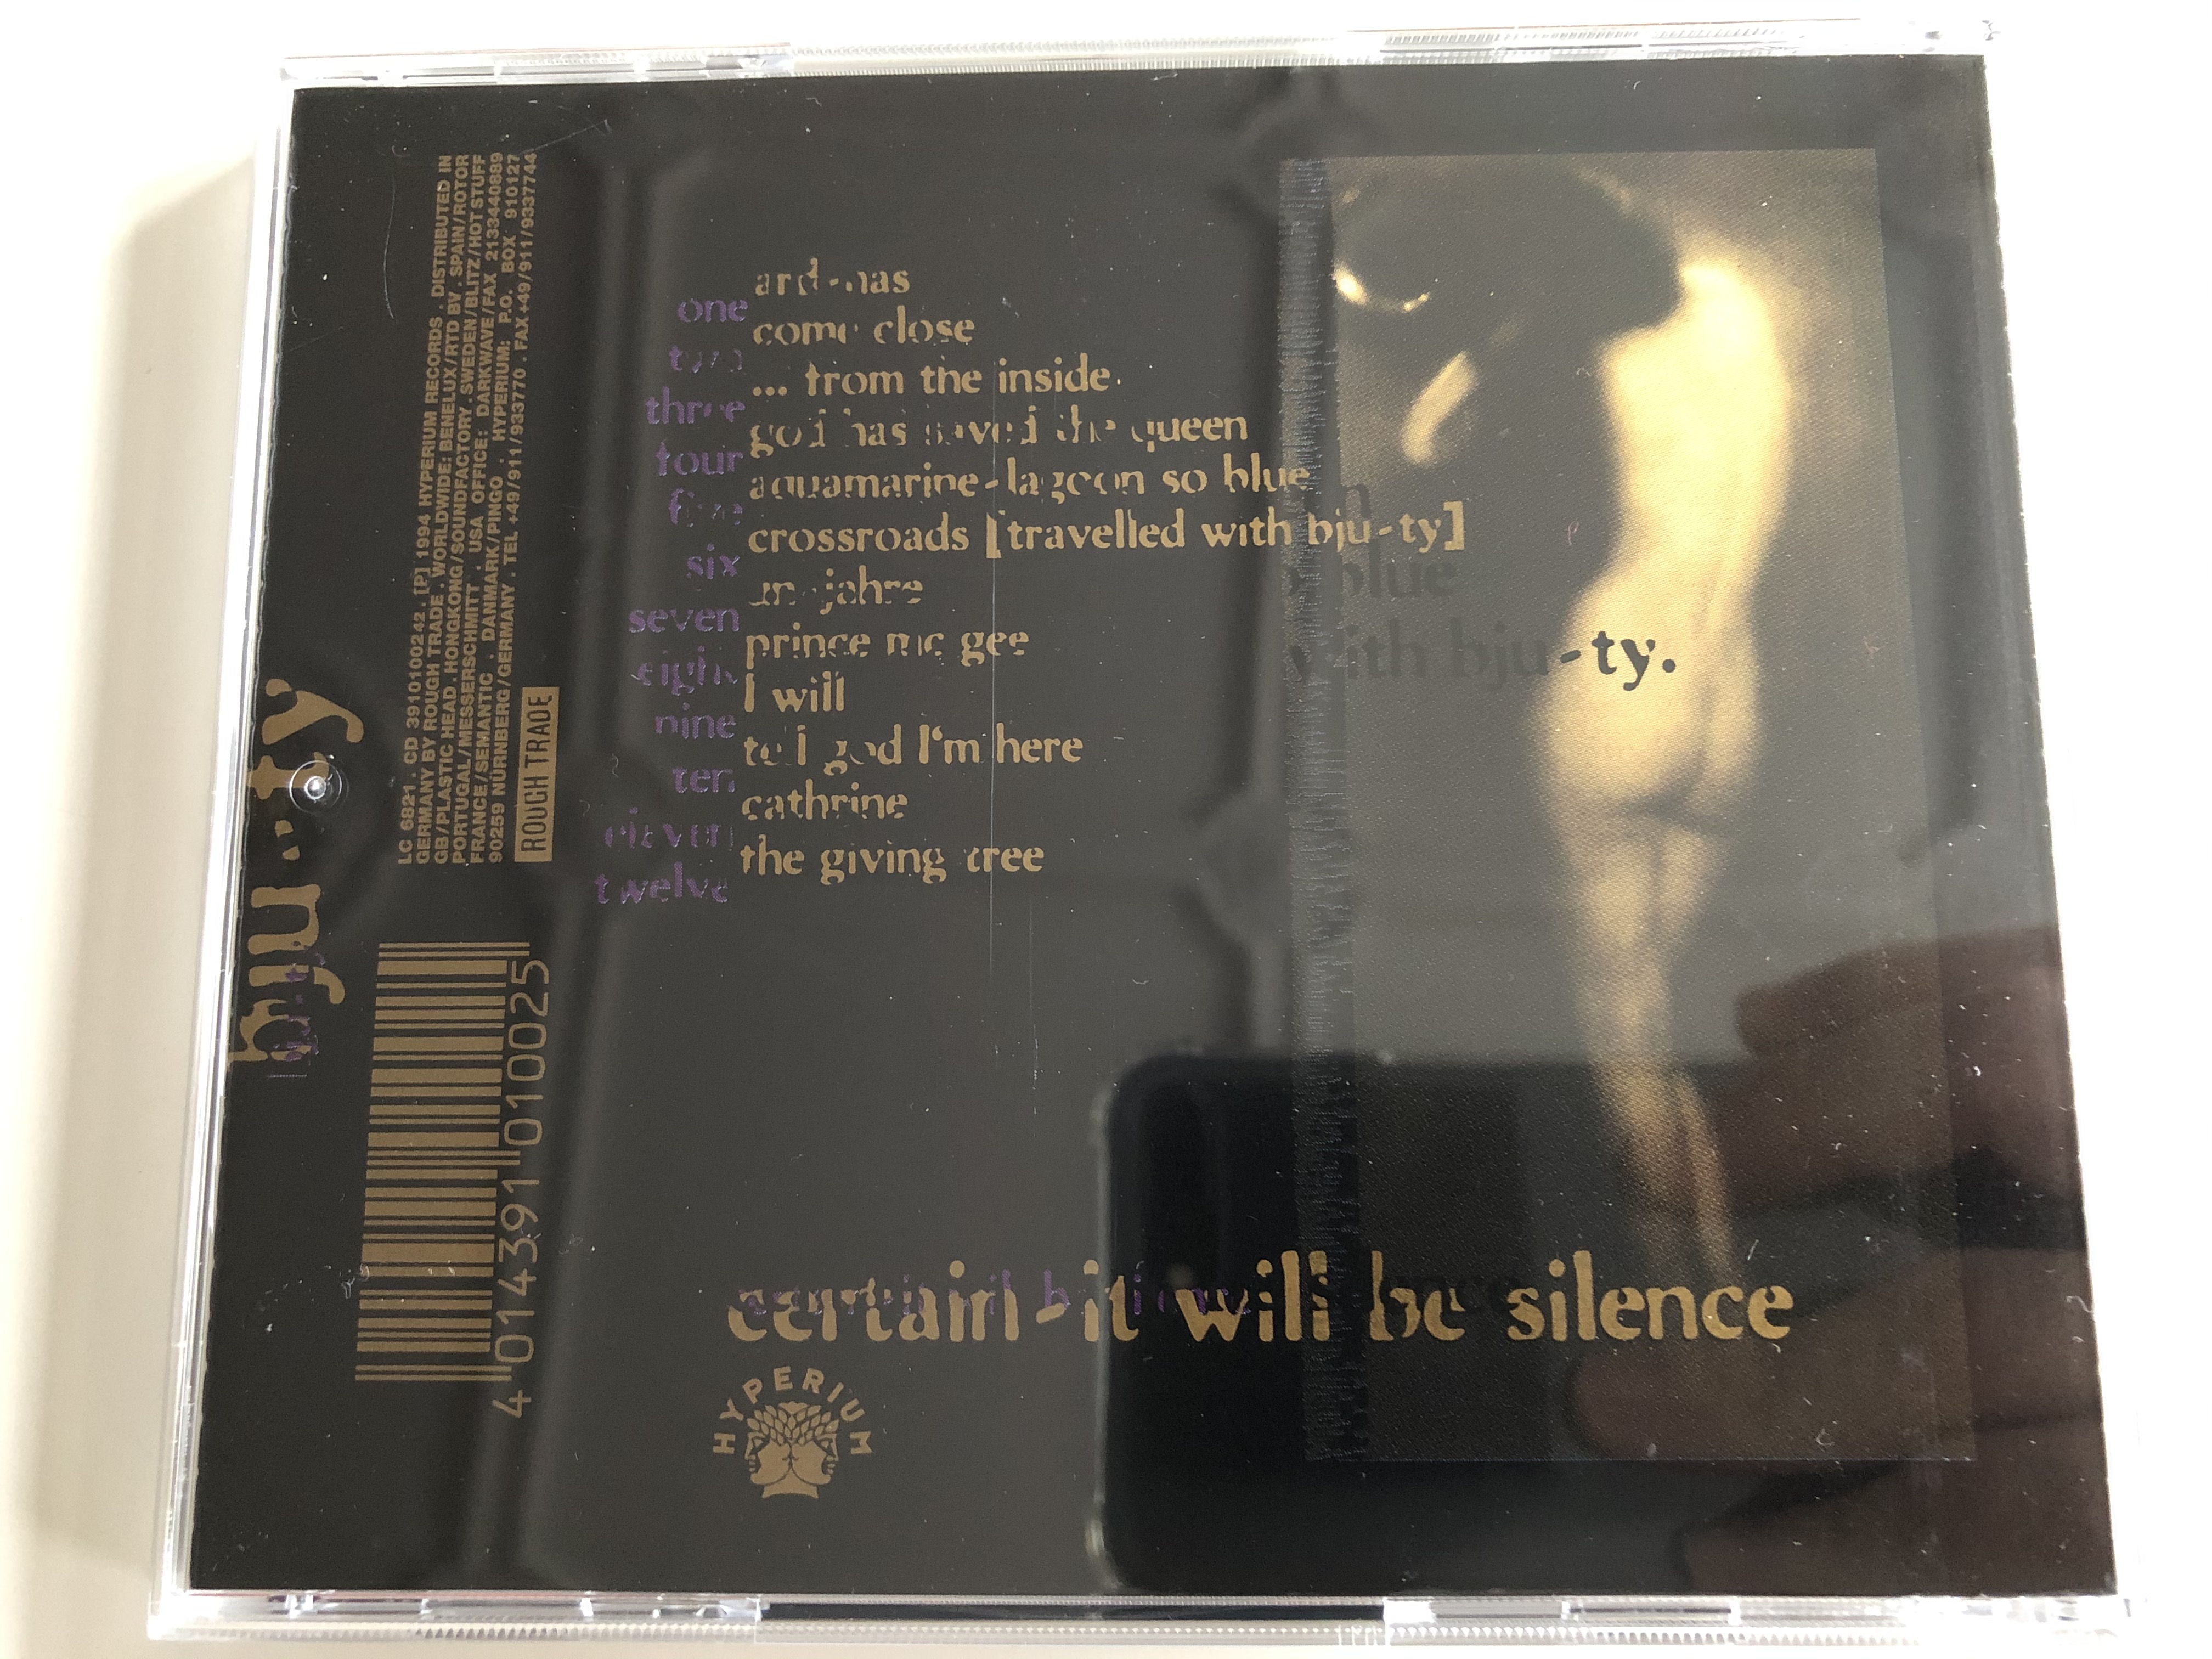 silence-gift-bju-ty-the-skin-is-broken-by-tears-hyperium-records-audio-cd-1994-39101002-42-8-.jpg